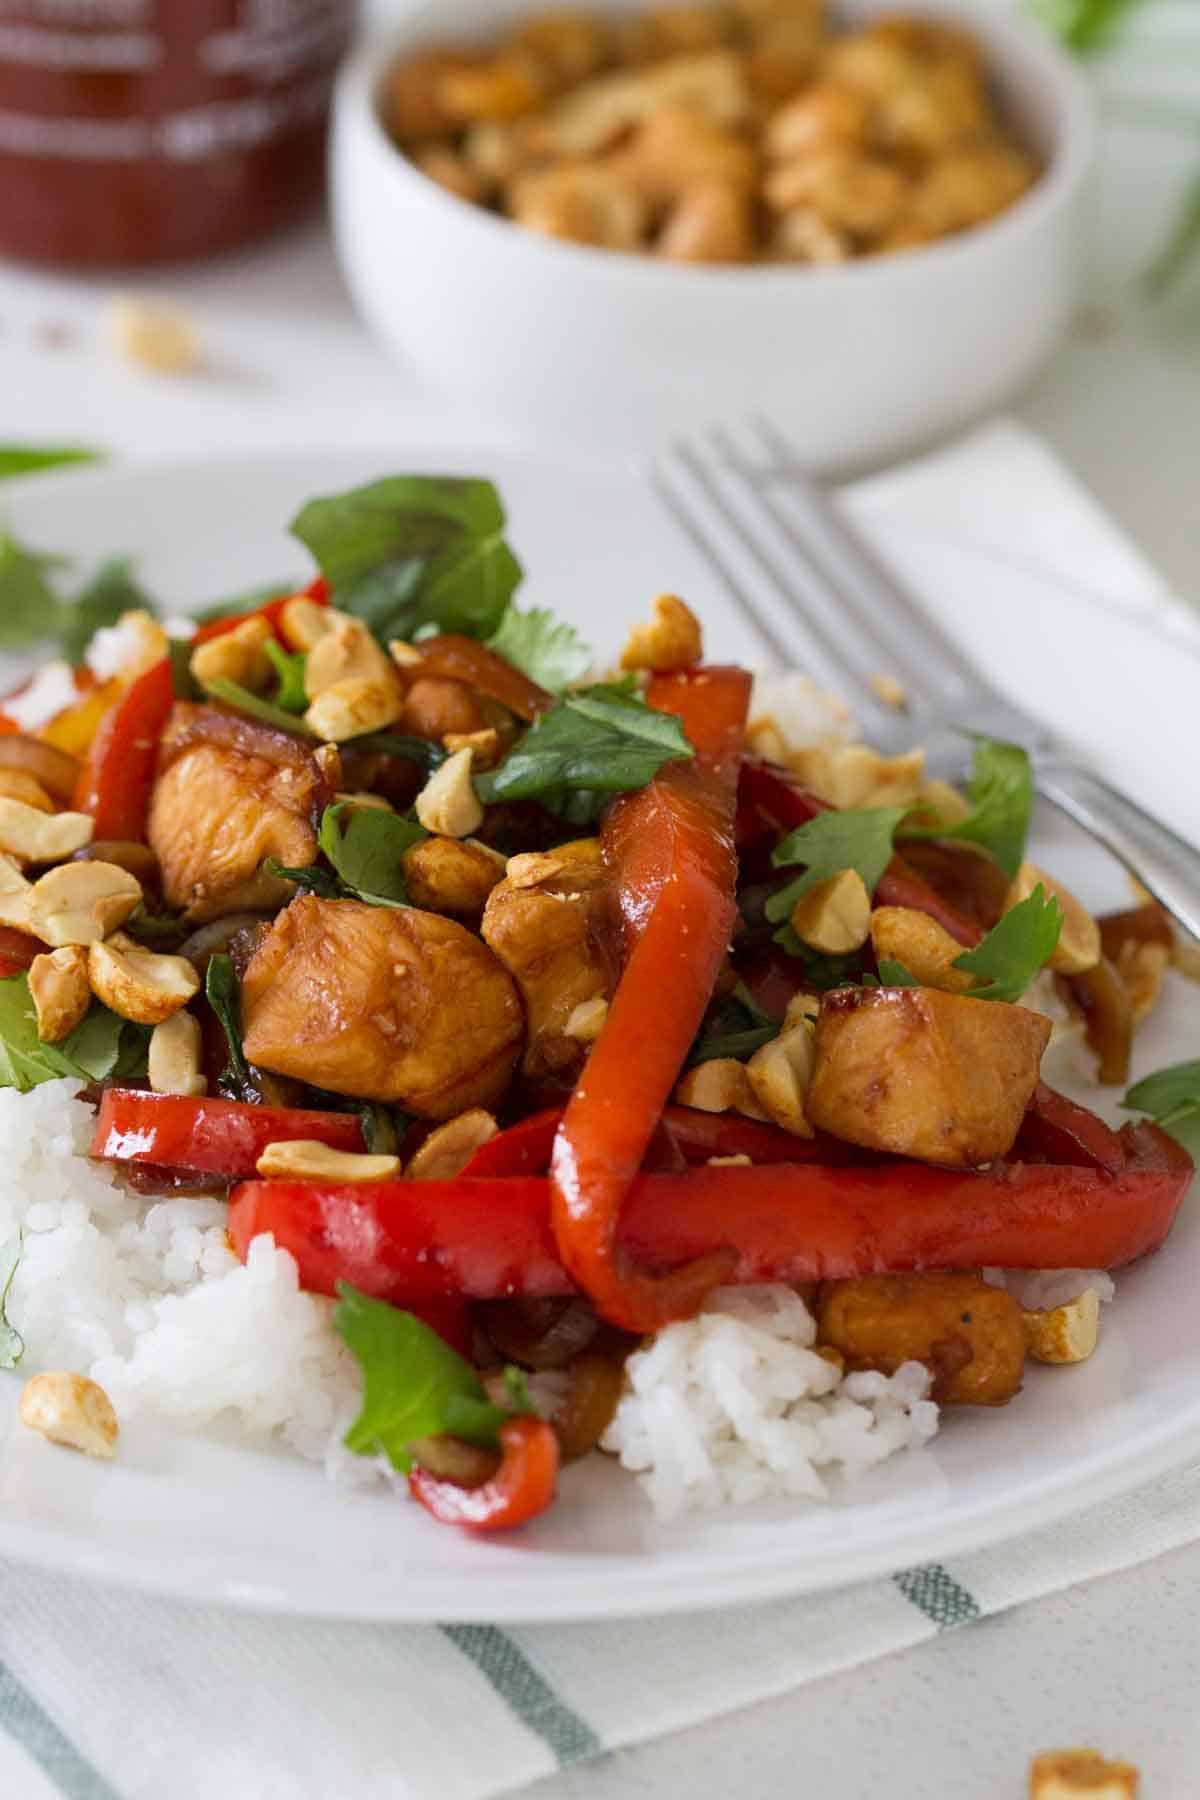 Thai Chicken is a go-to every summer - a Thai inspired dish with chicken, b...